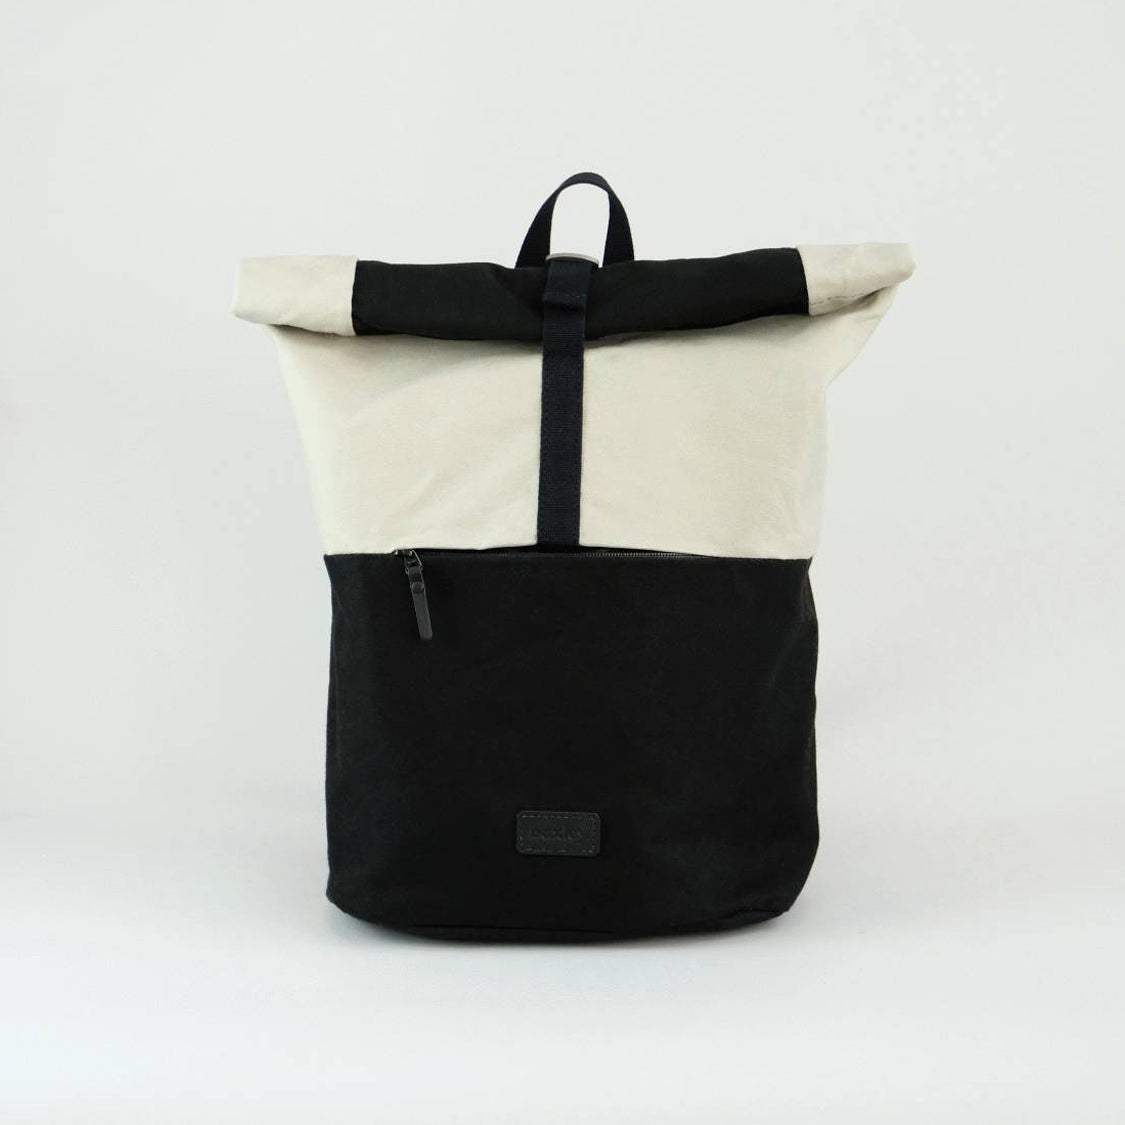 Front view of Max the backpack. A rolltop backpack made of waxed canvas in chalk white and black, with a front zipped pocket visible.